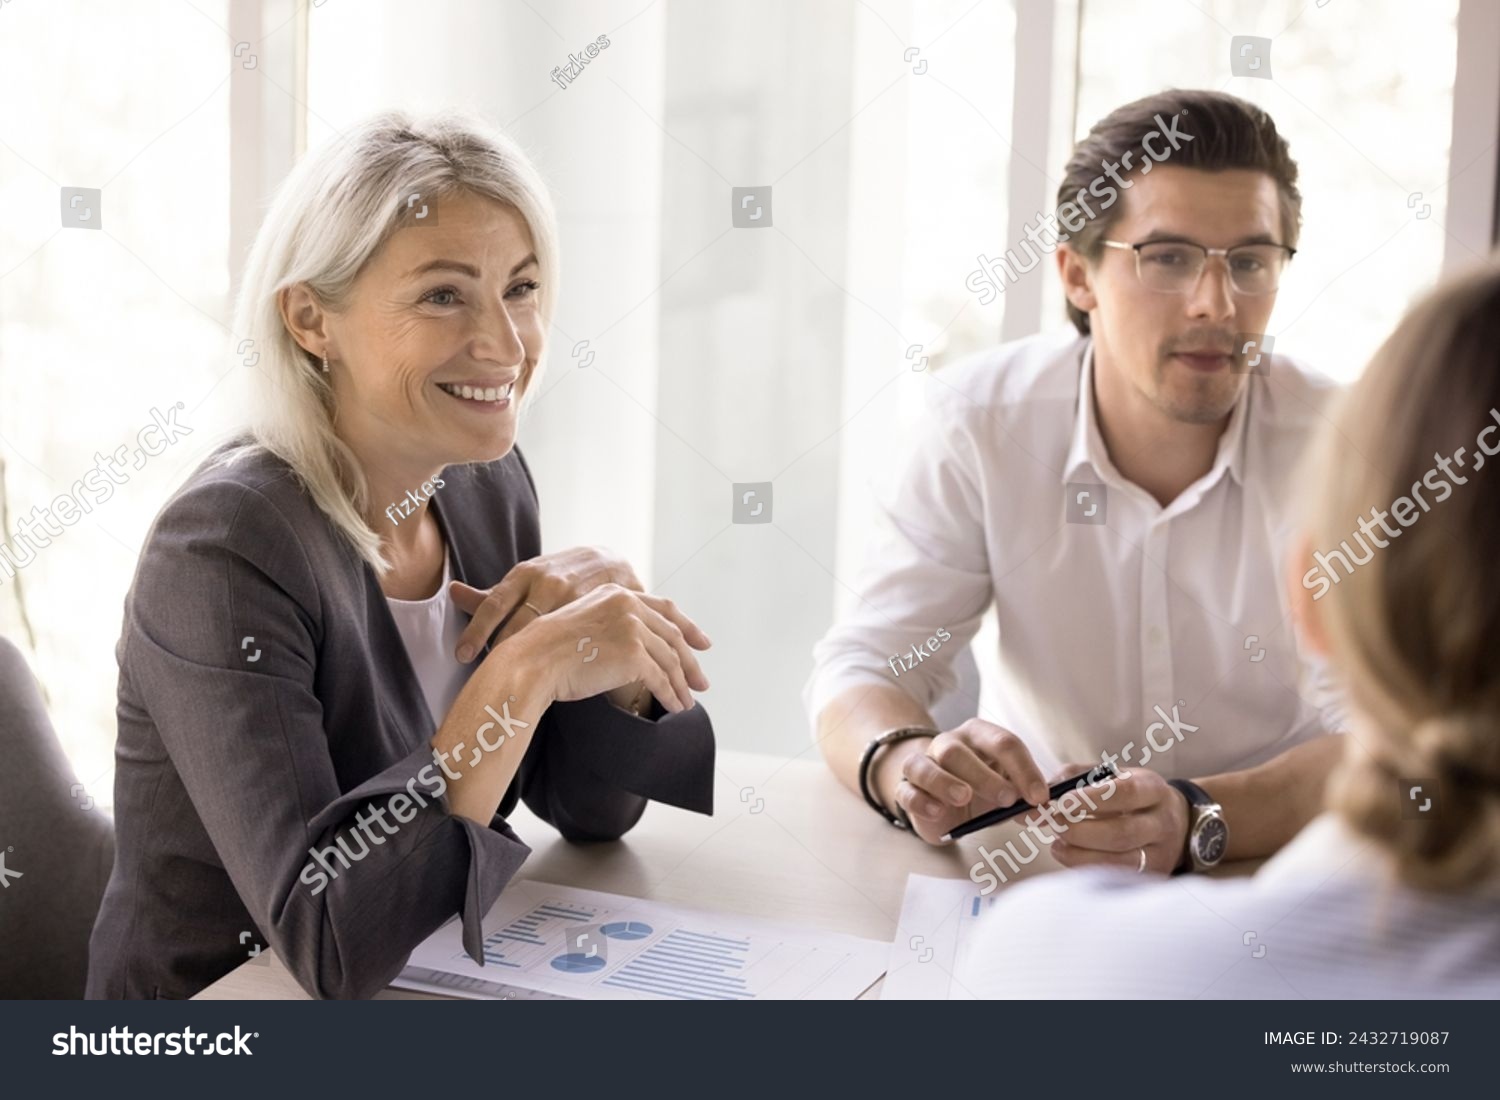 Mature smiling businesslady take part in meeting in office with colleagues, business partners, staff members to share ideas, express opinion, consider joint project, strategy discussion in boardroom #2432719087